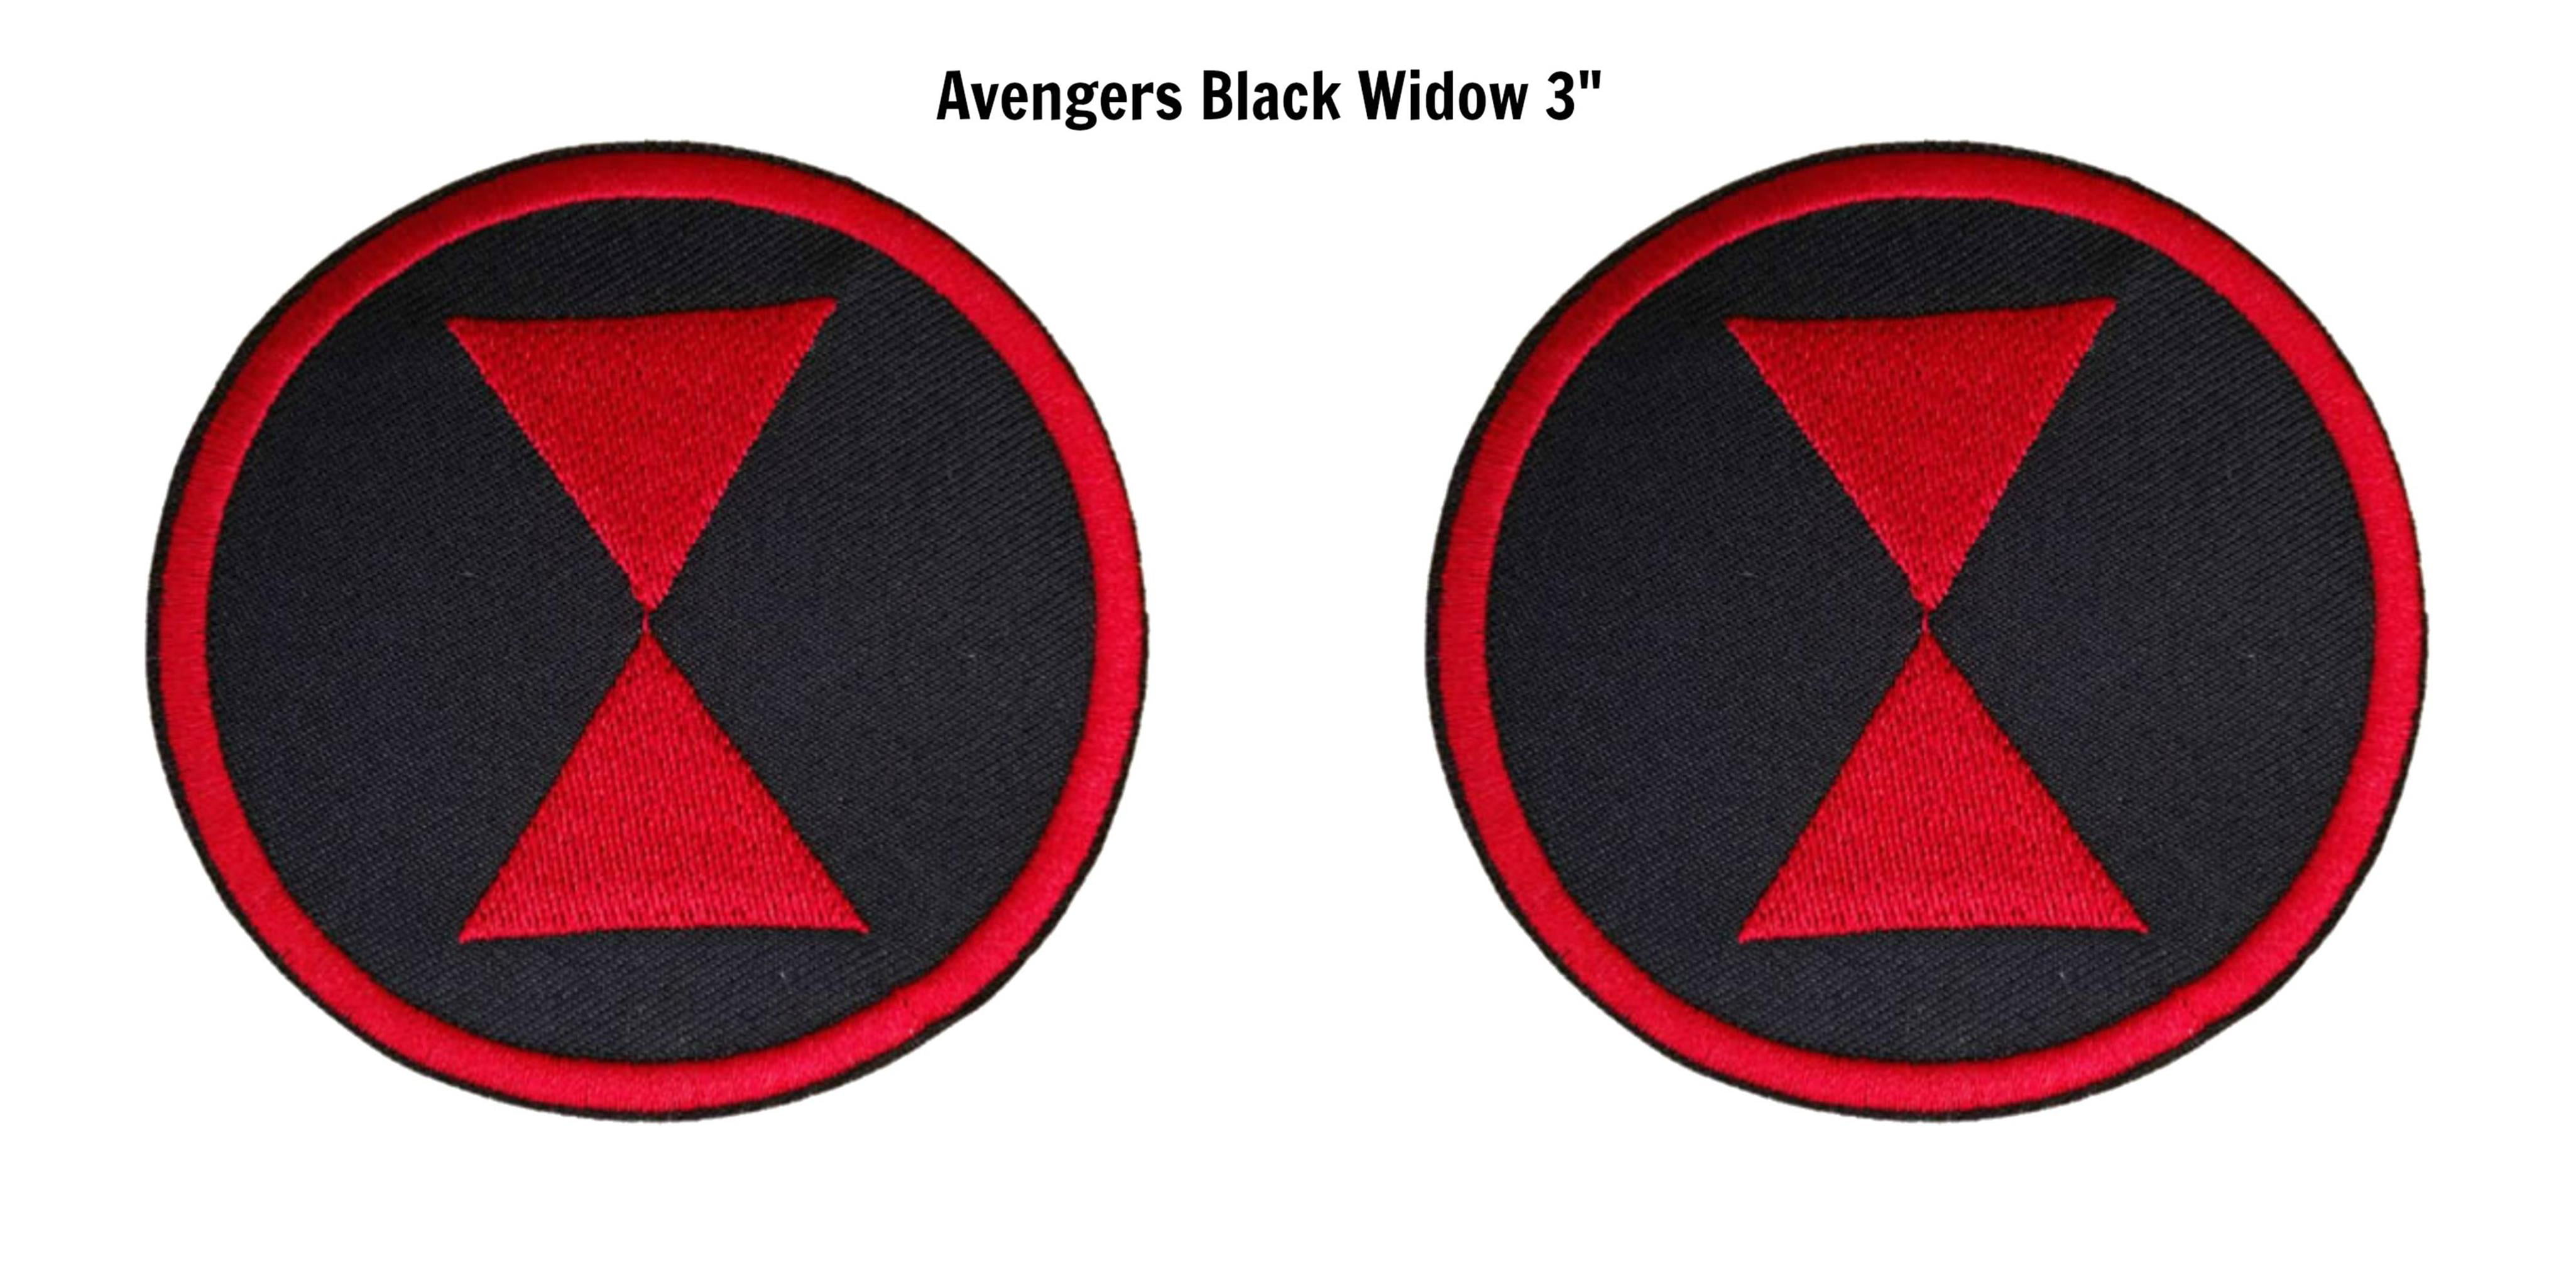 Avengers Movie patch set of 3 